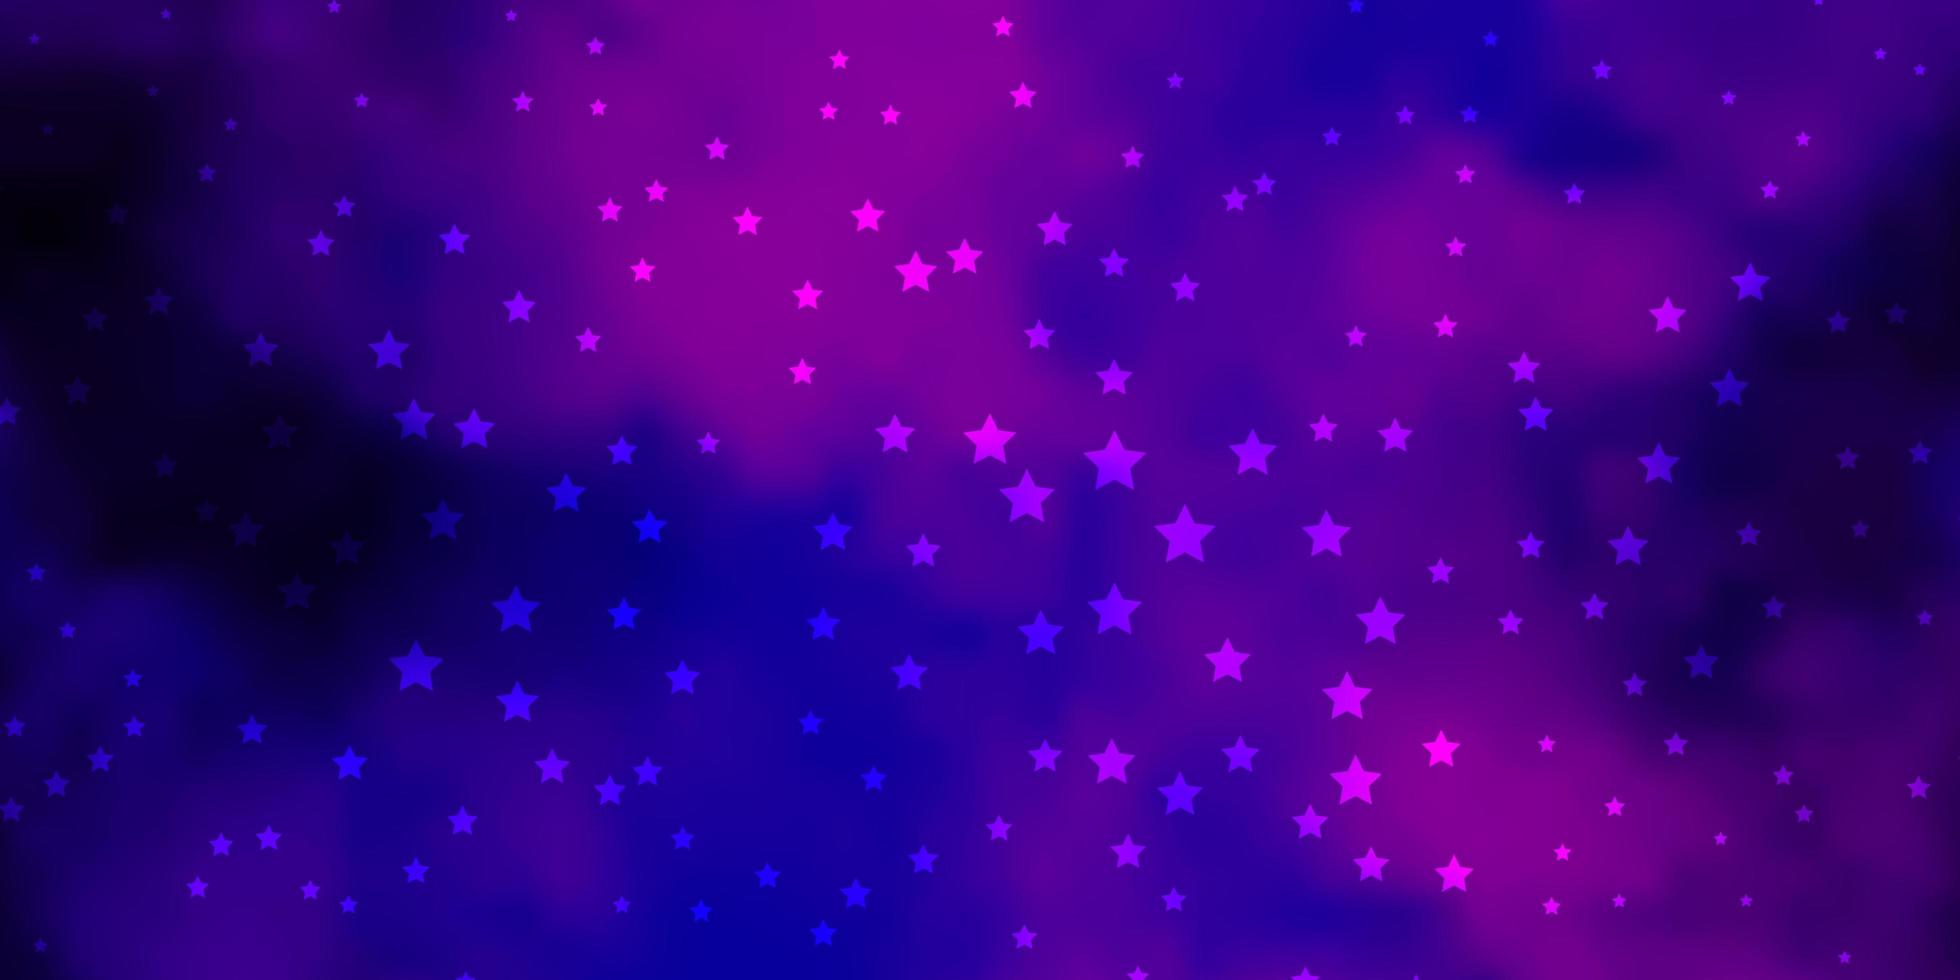 Dark Purple, Pink vector background with small and big stars. Colorful illustration with abstract gradient stars. Pattern for wrapping gifts.